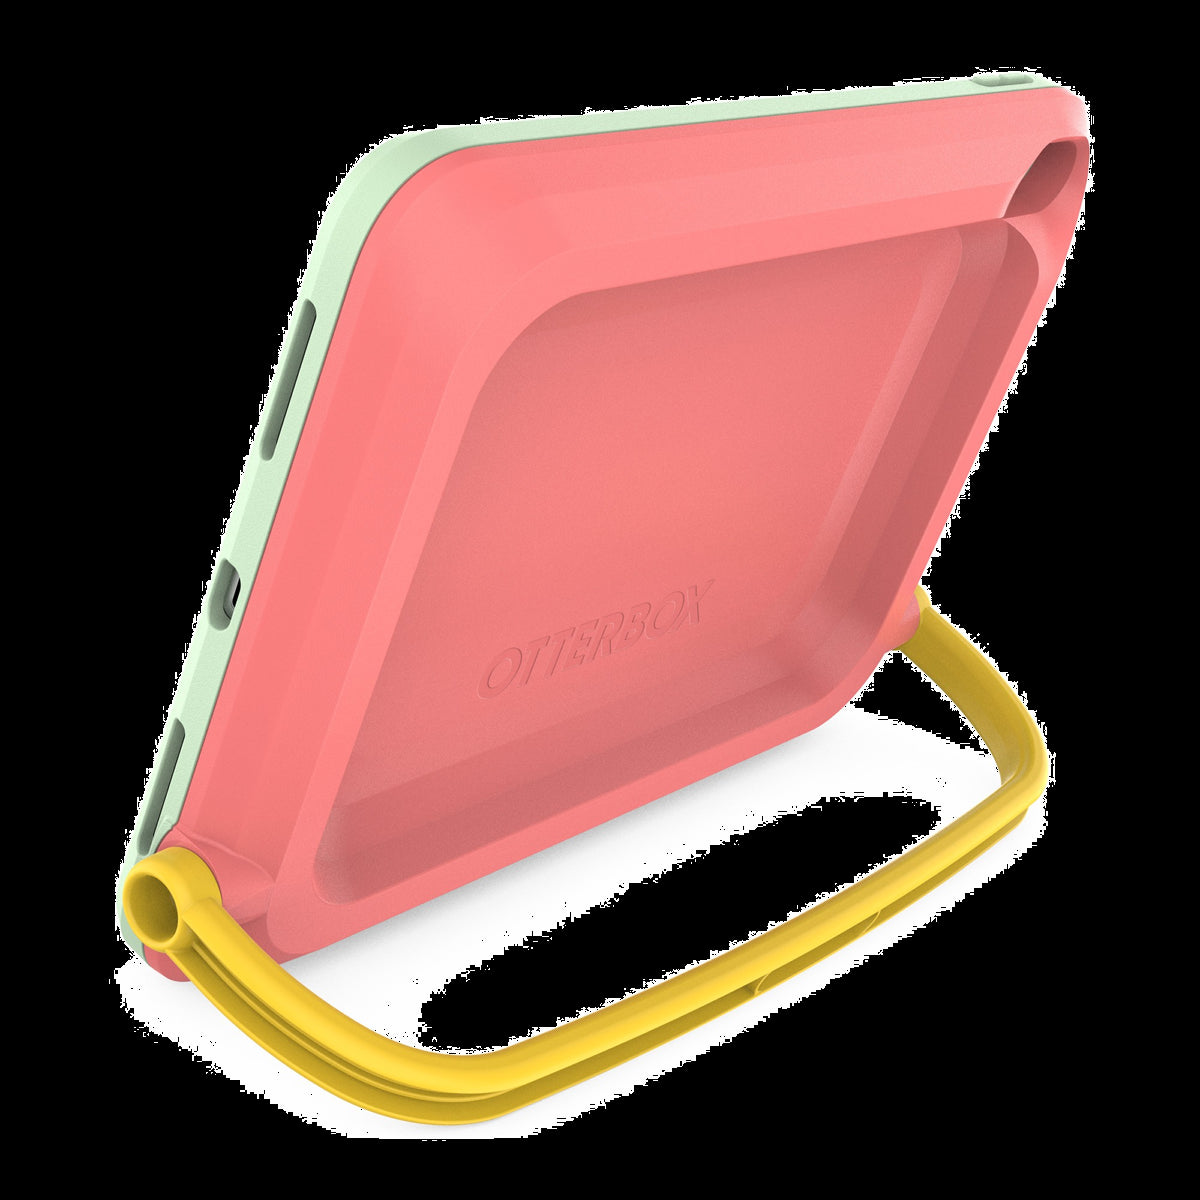 <p>The OtterBox EasyGrab case is made for kids to defy drops and to outlast abuse. Parents can breathe easy knowing their kids’ iPad is protected from play and learning.</p>